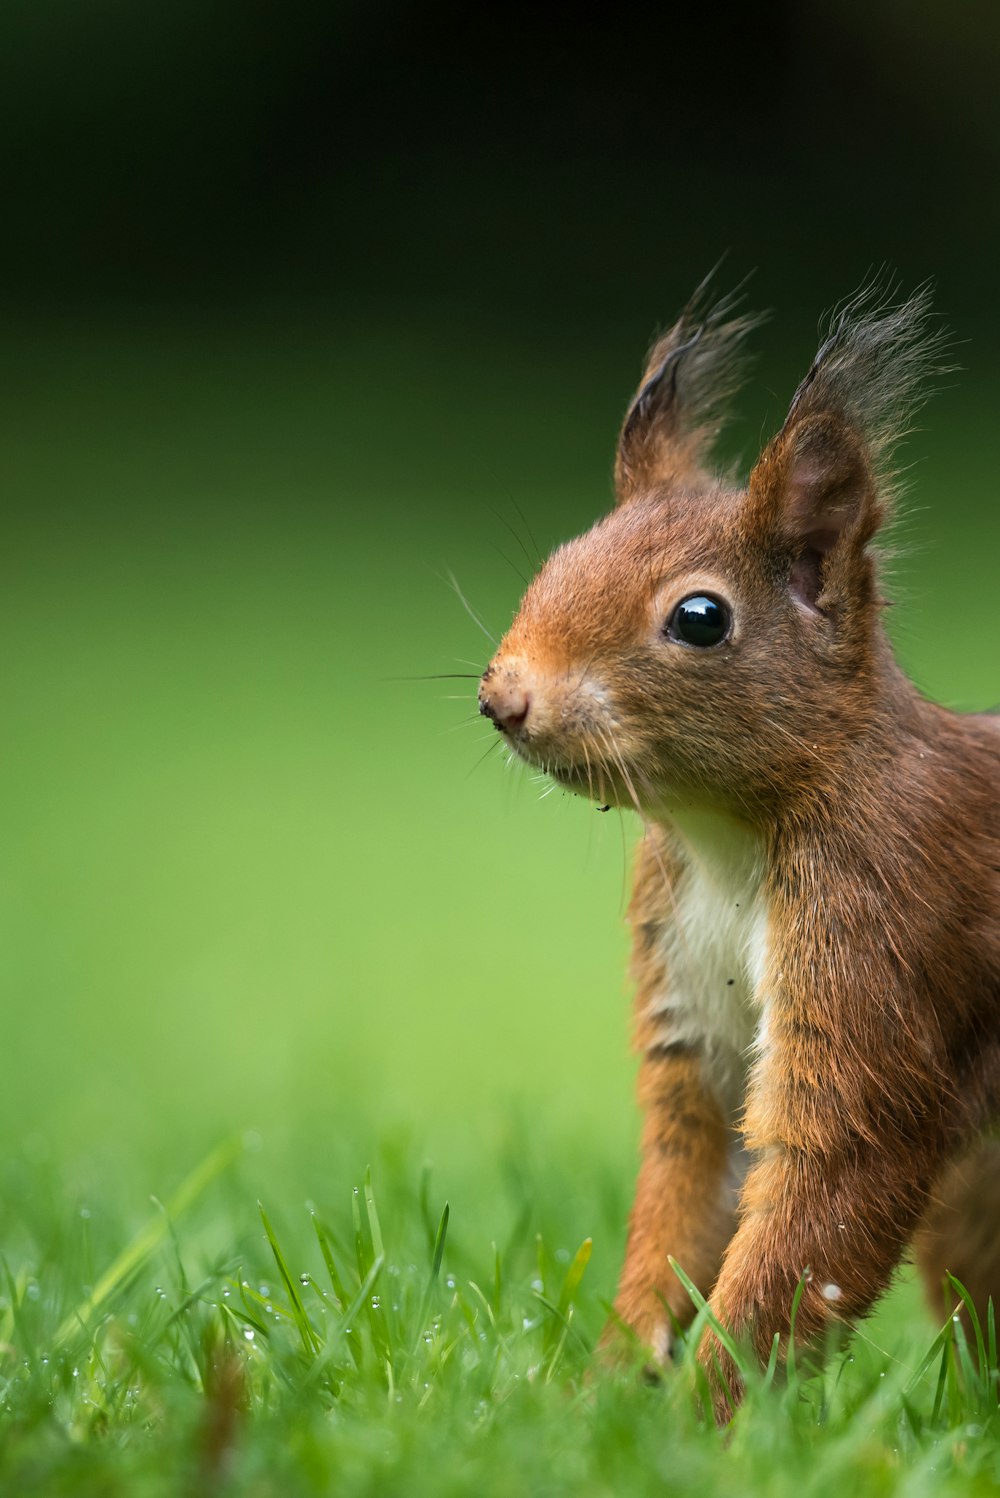 tilt-shift lens photography of brown squirrel on green grass during daytime